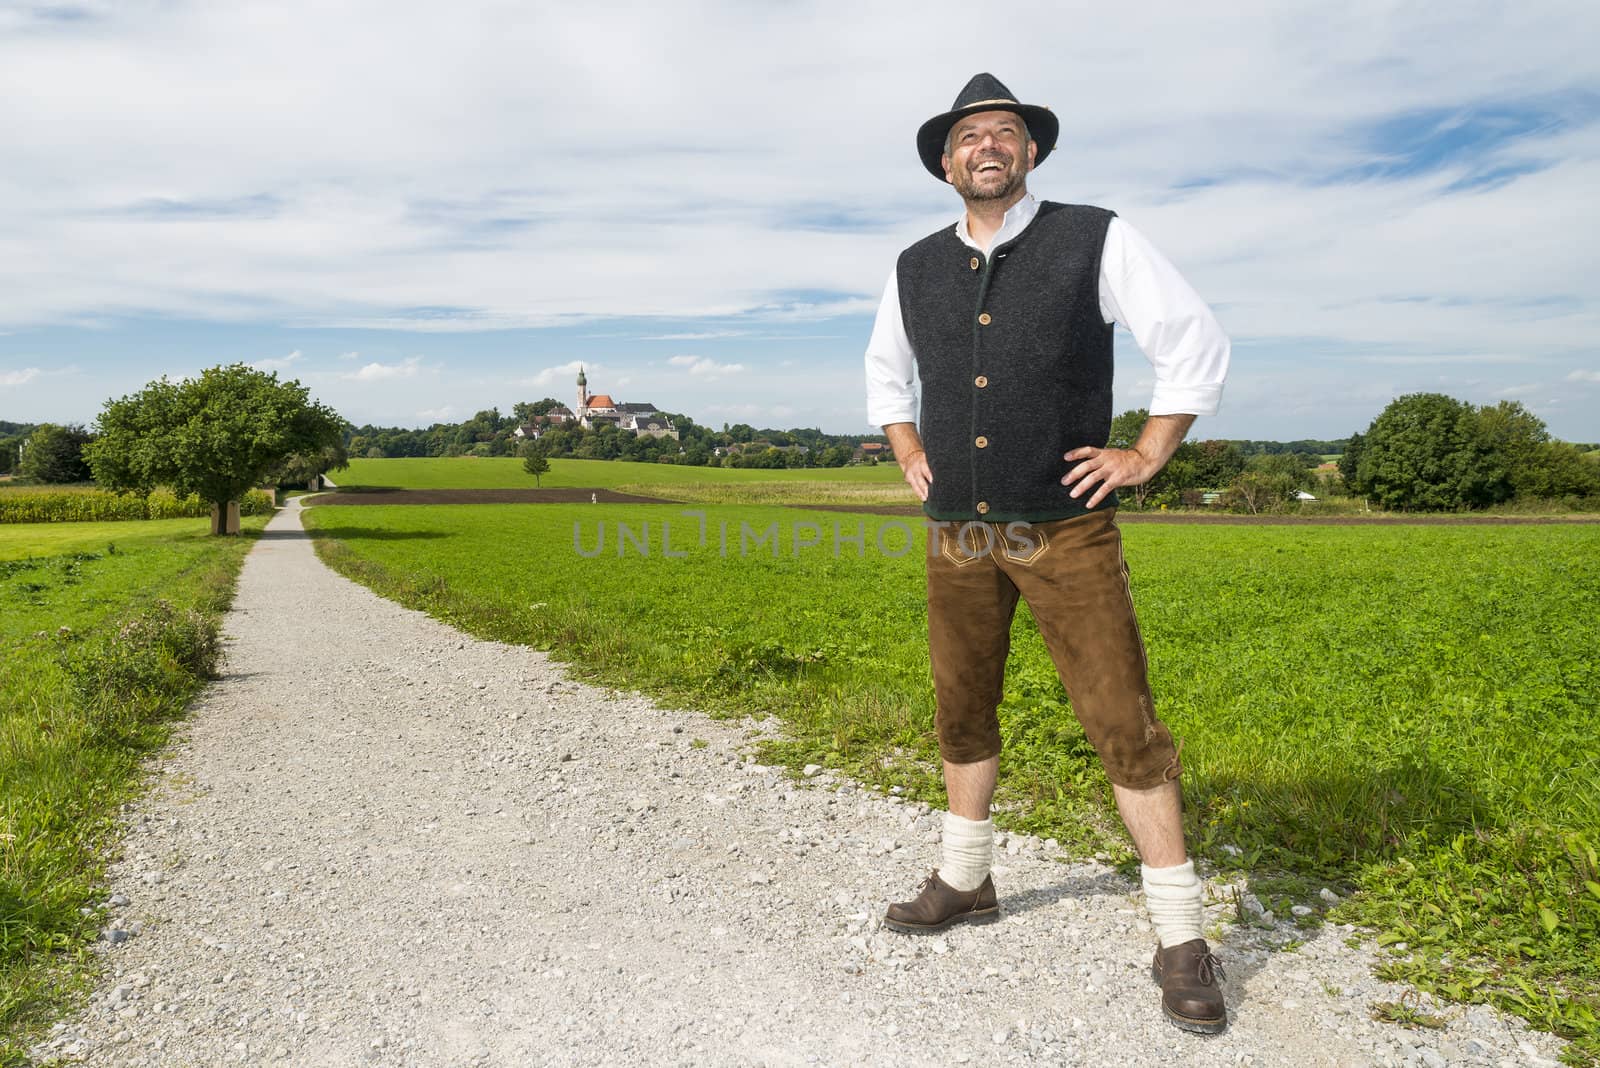 Bavarian traditional costume by w20er